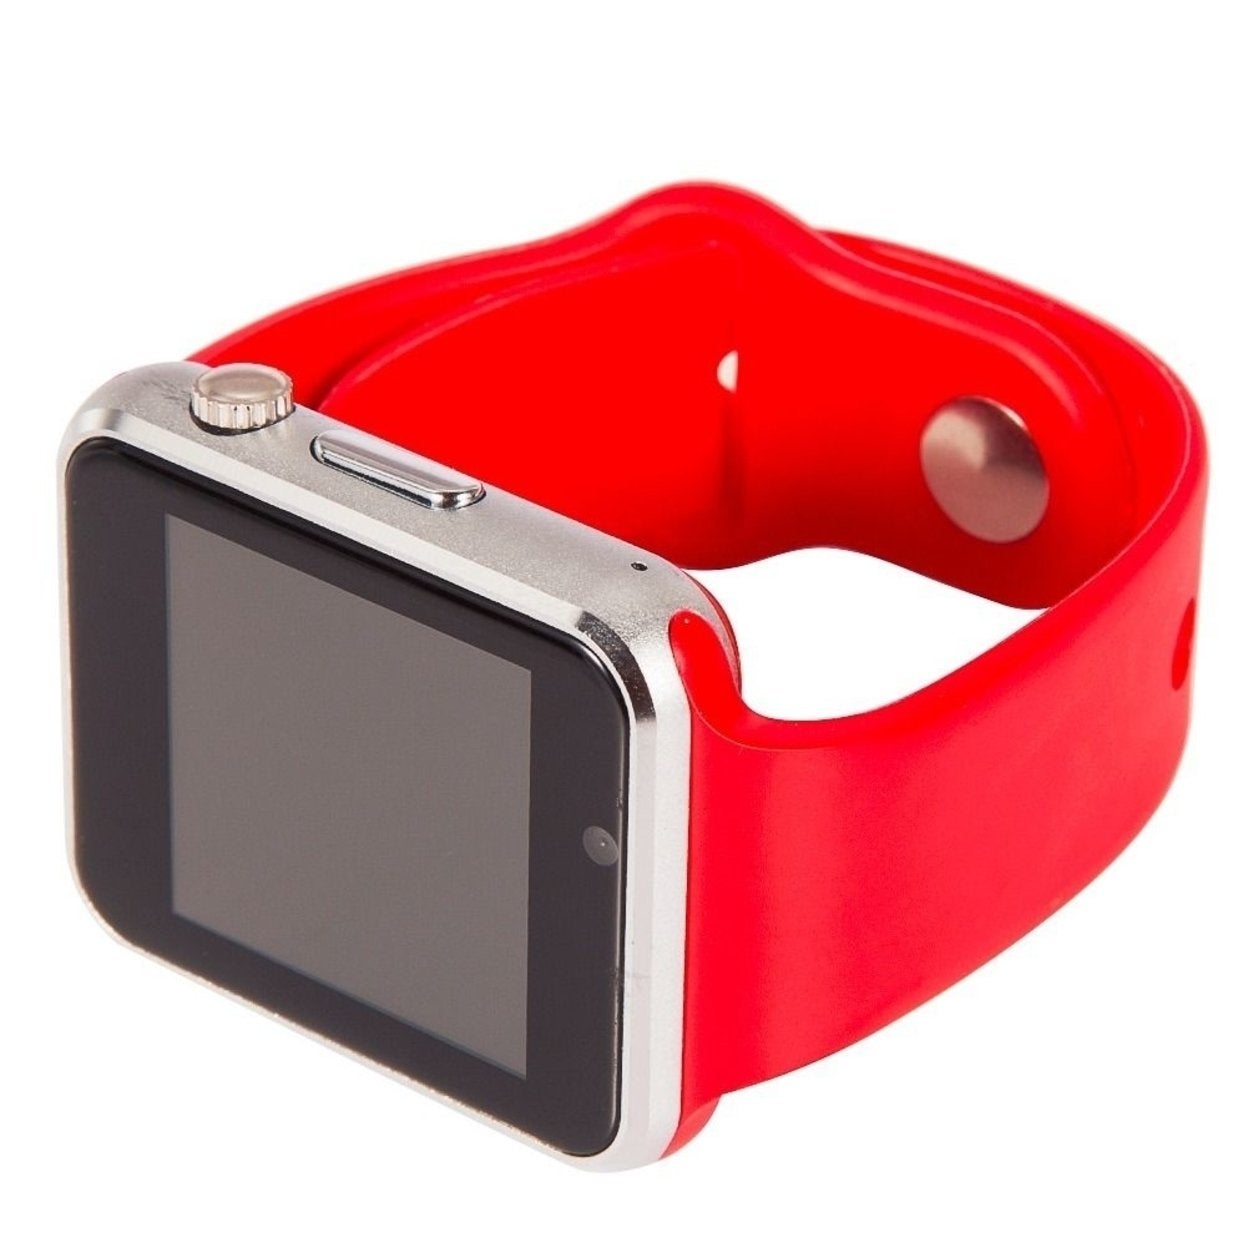 Mobile Smart Watch SW 001 with Touch Screen-Sim Card Slot-Memory-Camera-Bluetooth-Red